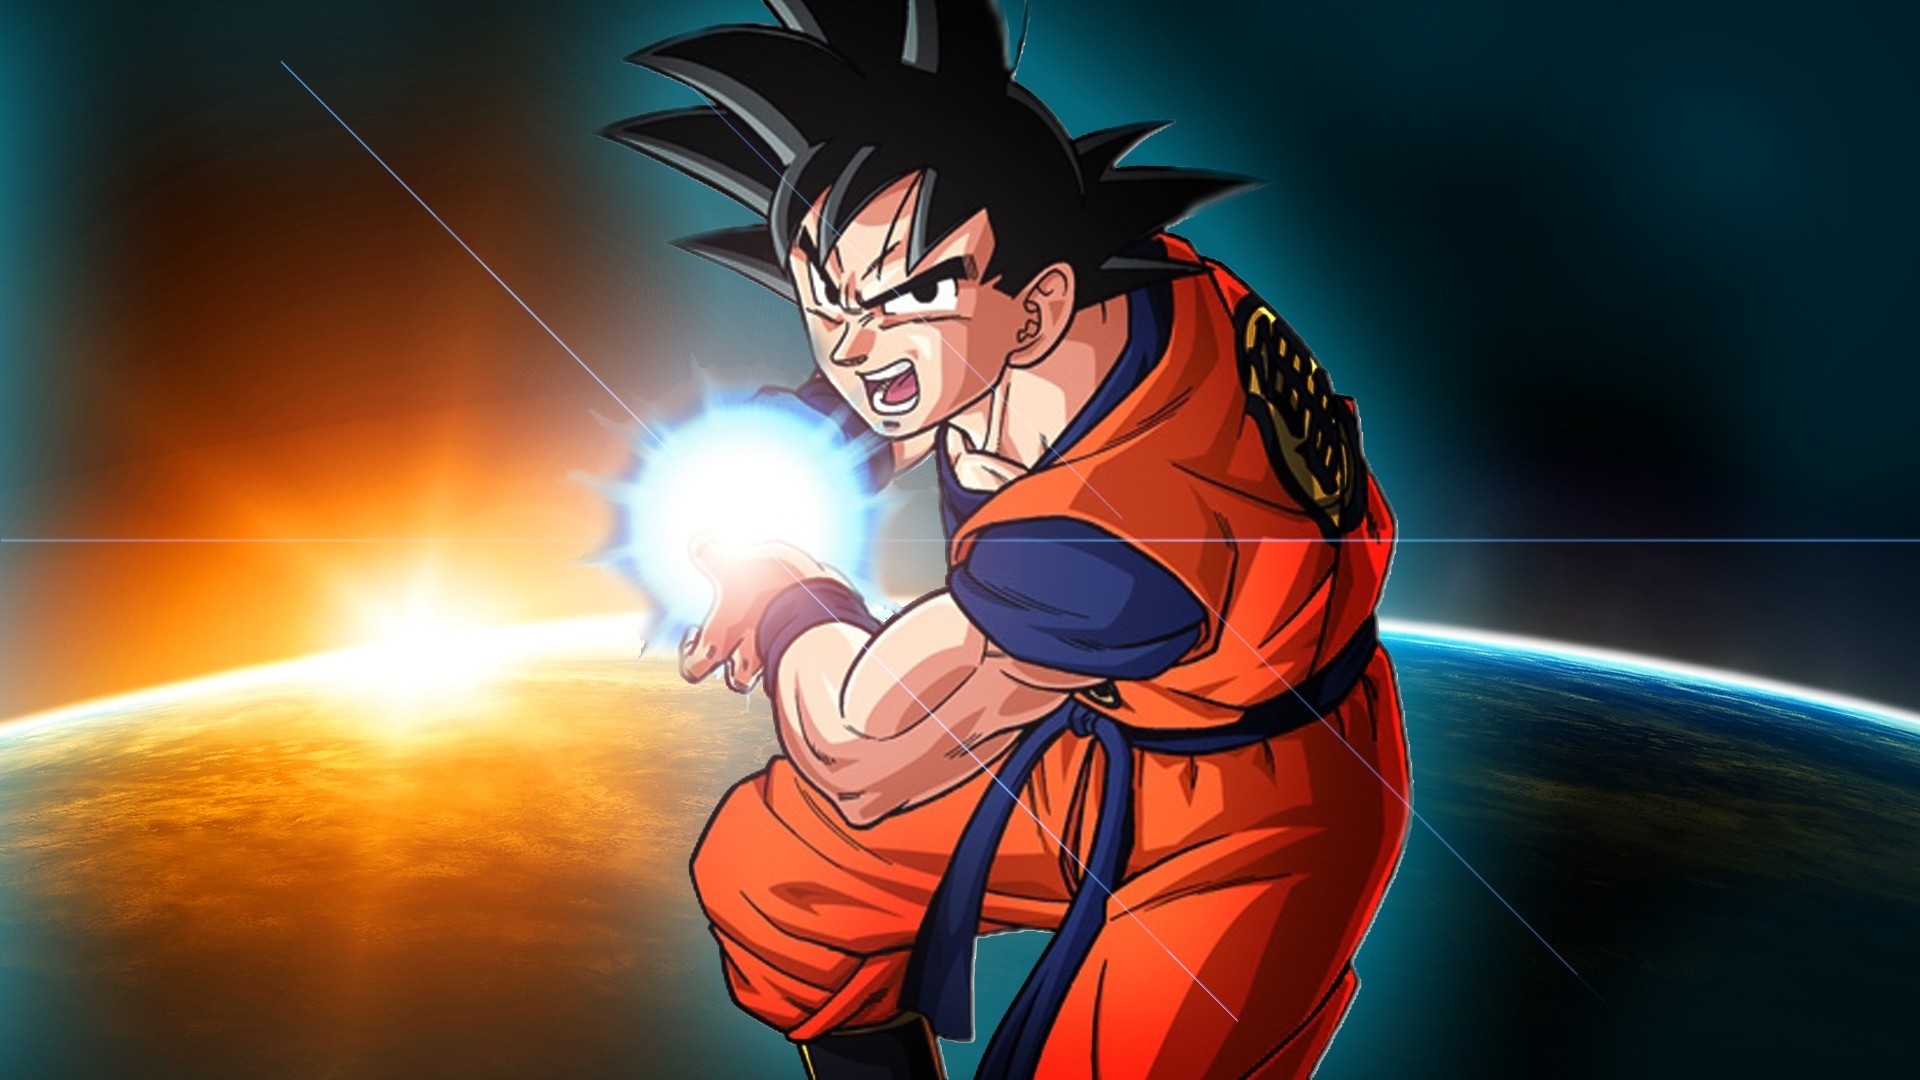 1920x1080 Dragon Ball Z Wallpapers Best Wallpapers